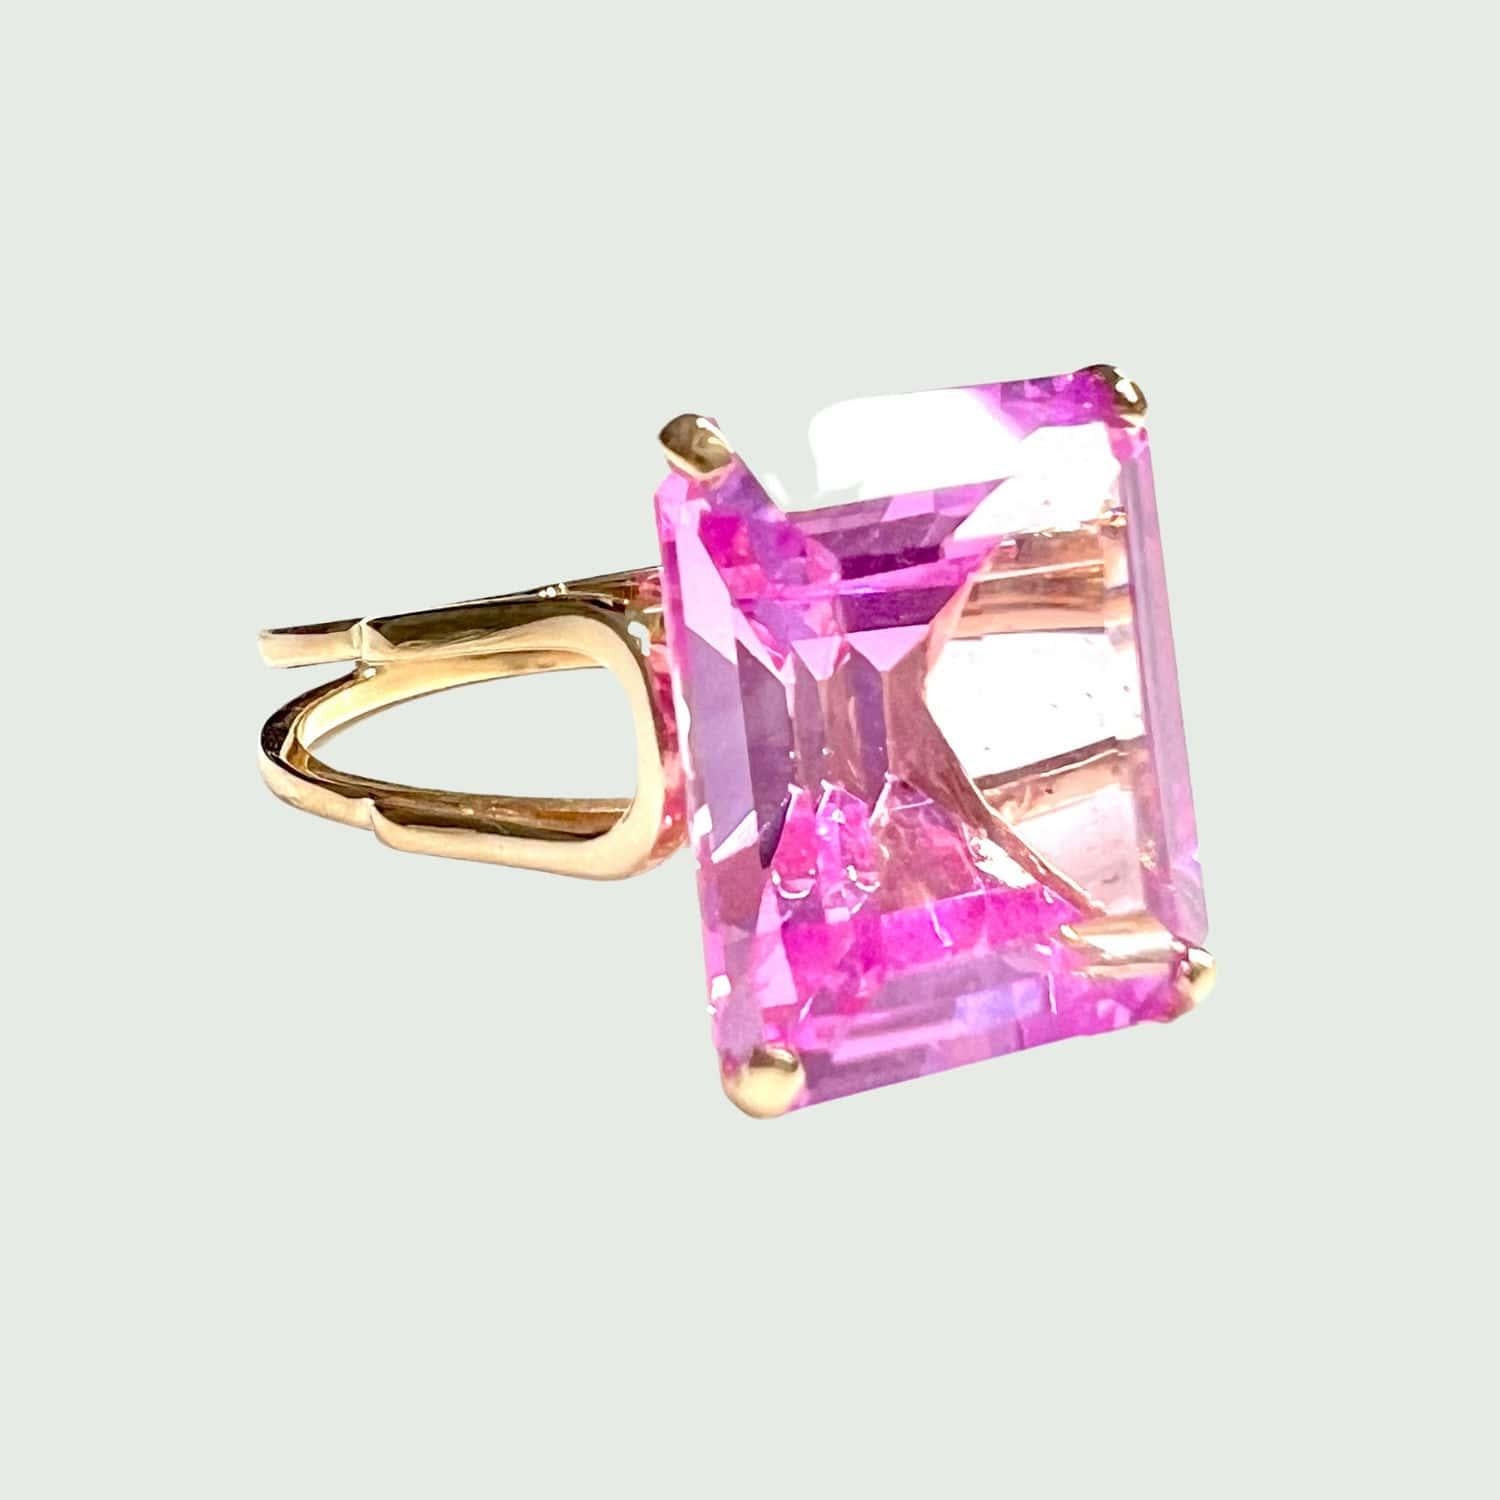 Step back in time to the retro era of the 1940s with this enchanting yellow gold 18k ring adorned with a Pink Spinel from France. The allure of this piece lies not only in its historical significance but also in its unique gemstone choice, the Pink